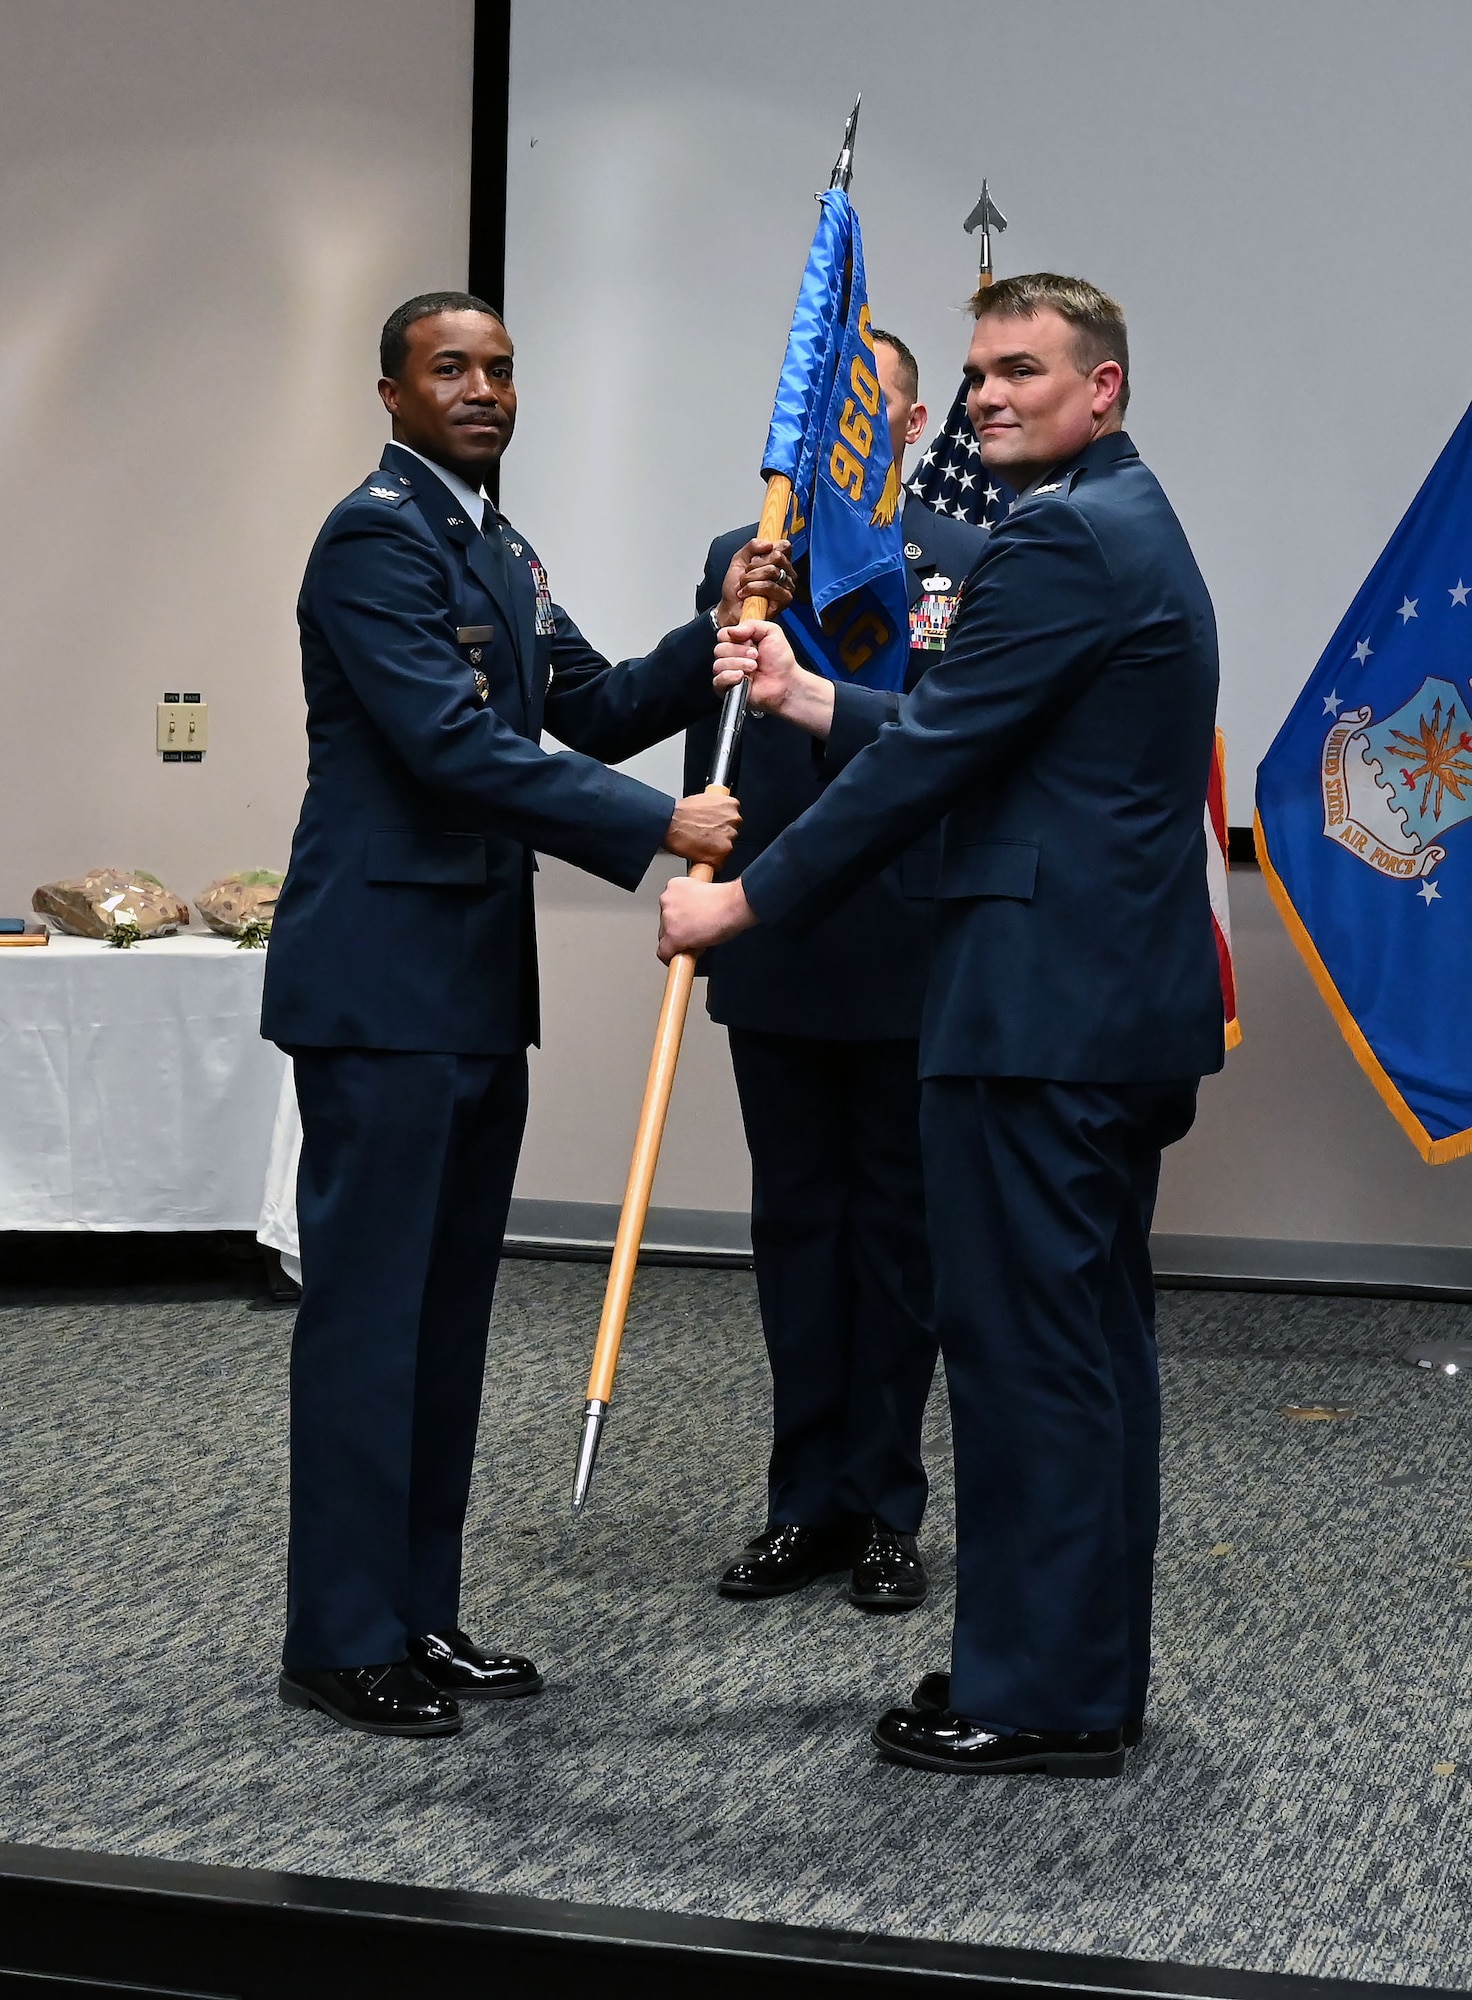 Col. Silas Darden, 960th Cyberspace Wing vice commander, presents the leadership guidon to Col. Richard Wallace, 960th COG commander, during the 960th COG change of command ceremony at Joint Base San Antonio-Lackland, Texas, Oct. 15, 2022. Wallace was the Individual Mobilization Augmentee to the 567th Cyberspace Operations Group commander at JBSA-Lackland. (U.S. Air Force photo by Staff Sgt. Monet Villacorte)